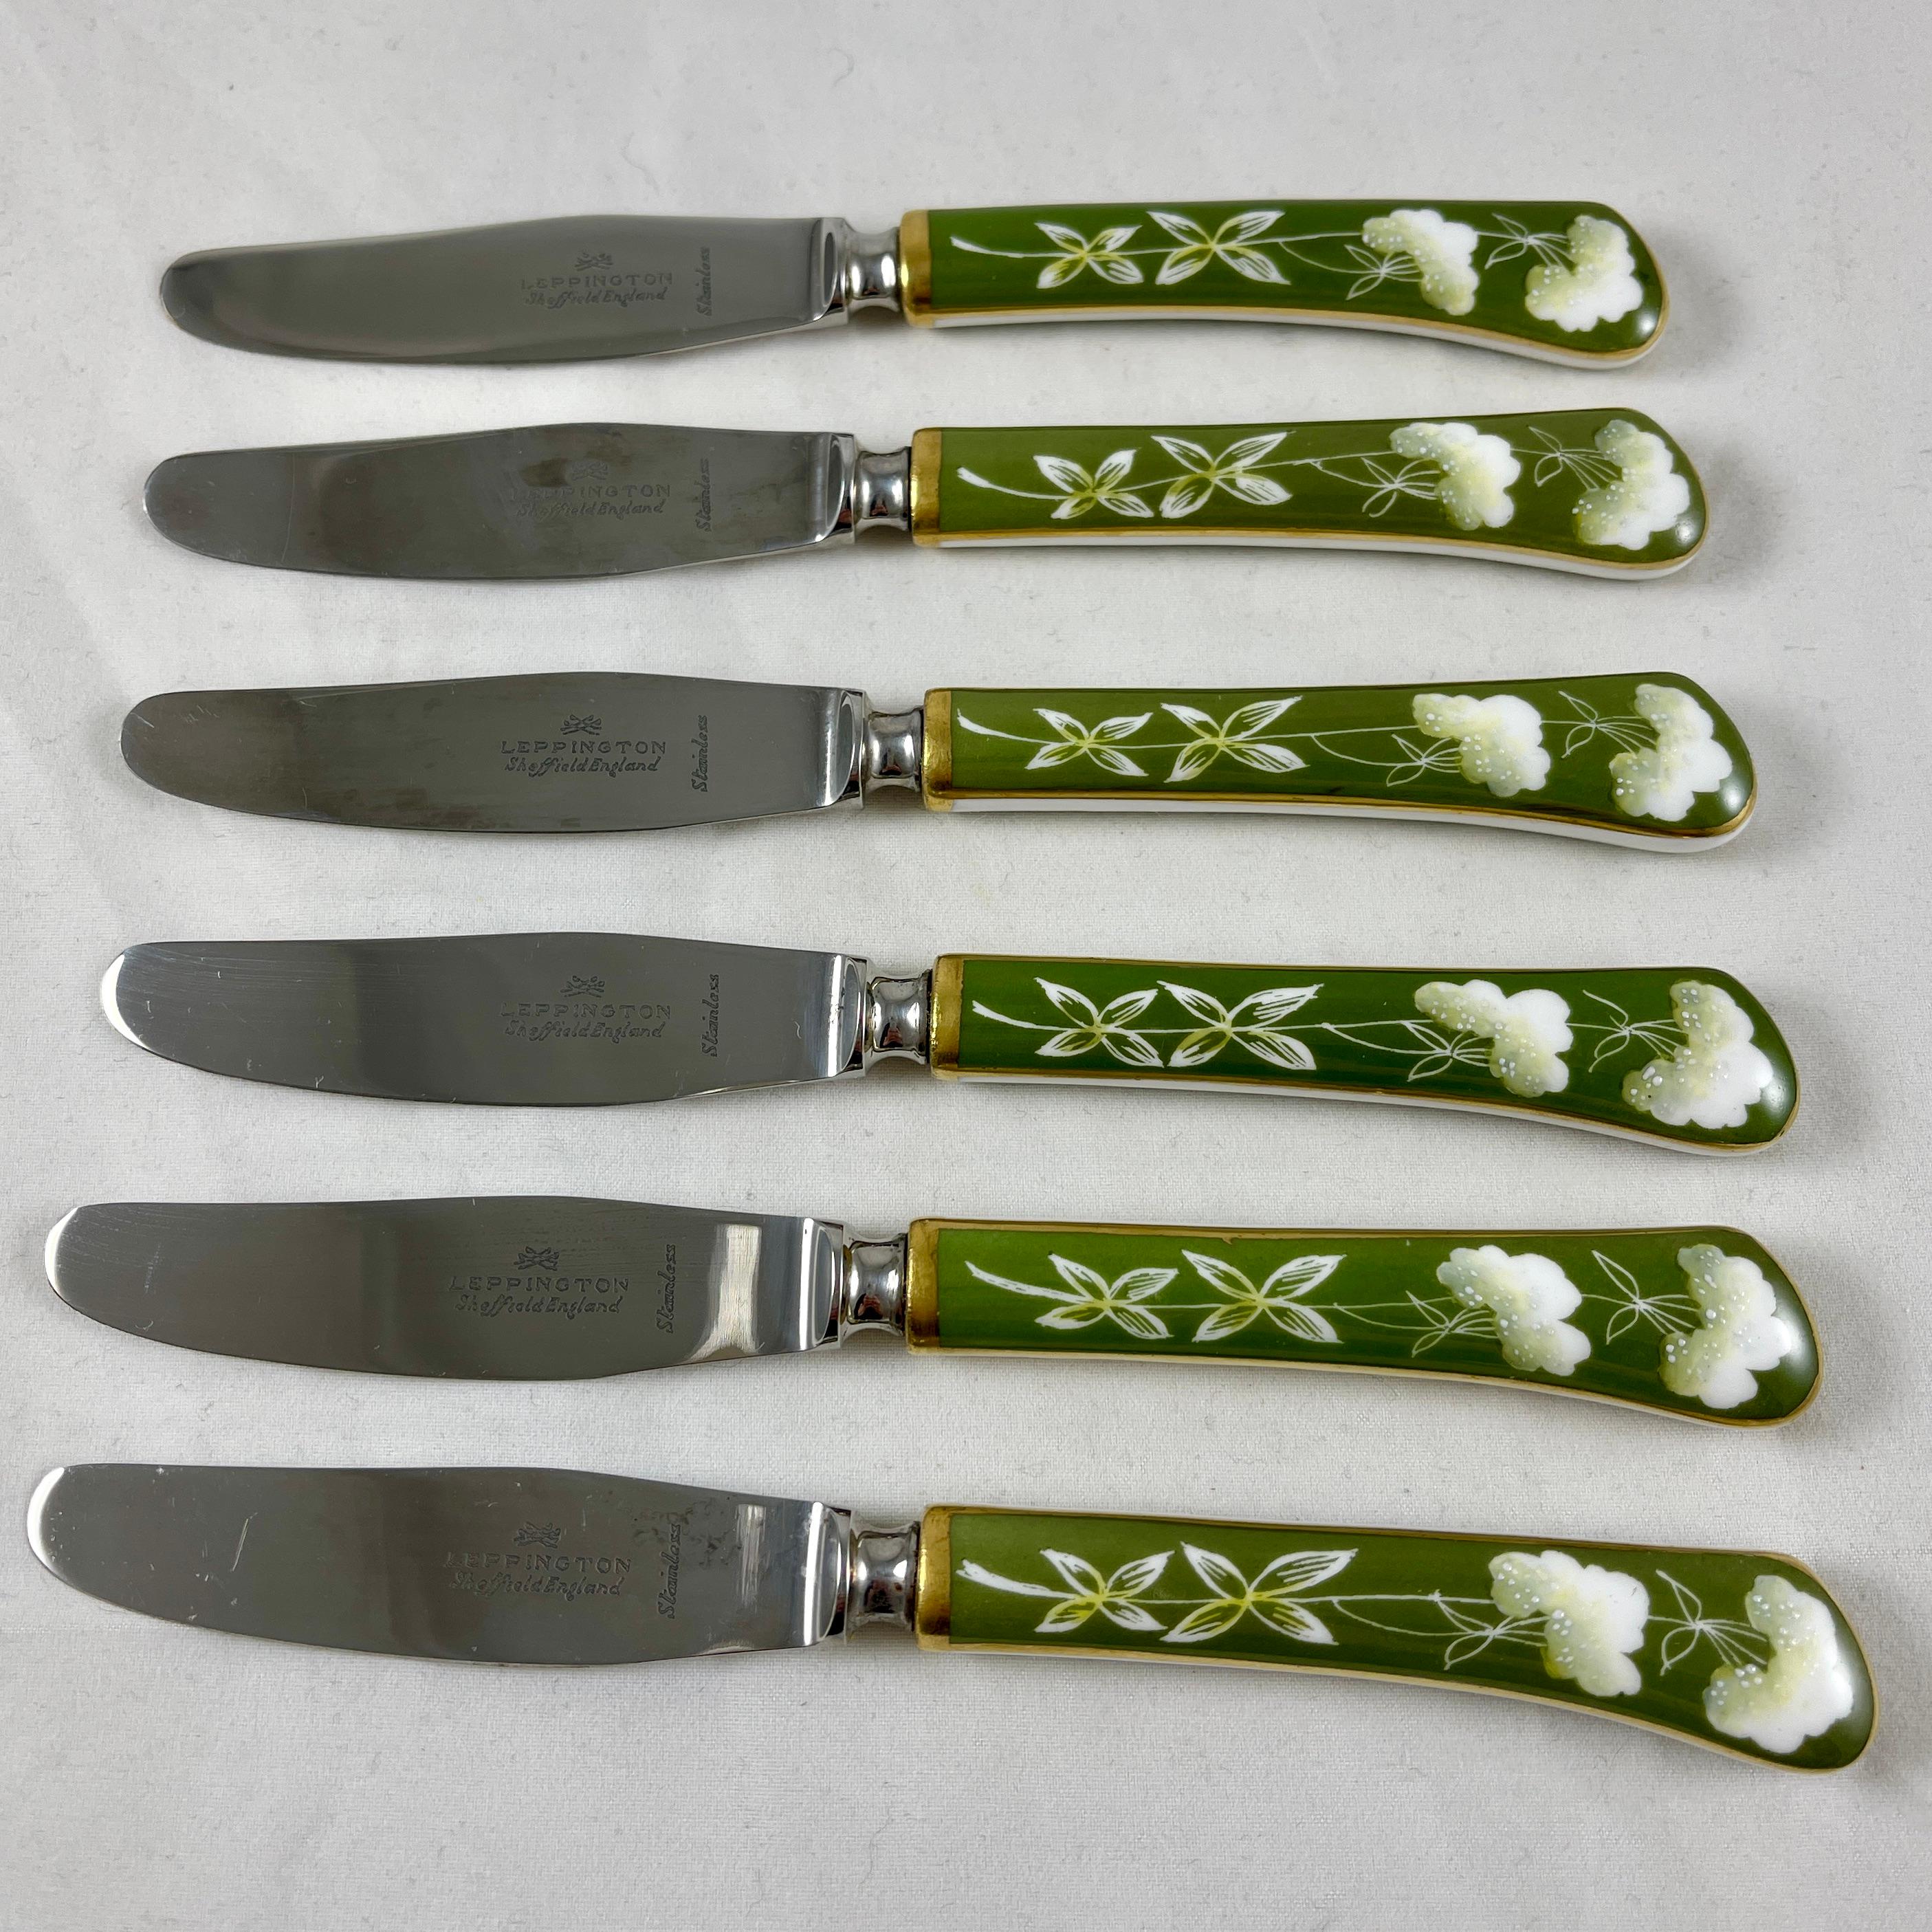 A beautiful six piece set of spreaders by Cutlass Leppington – Sheffield, England, circa 1930-1940.

The heat-forged Stainless Steel and hand painted bone china handled cutlery is in the original presentation case, with the care pamphlet